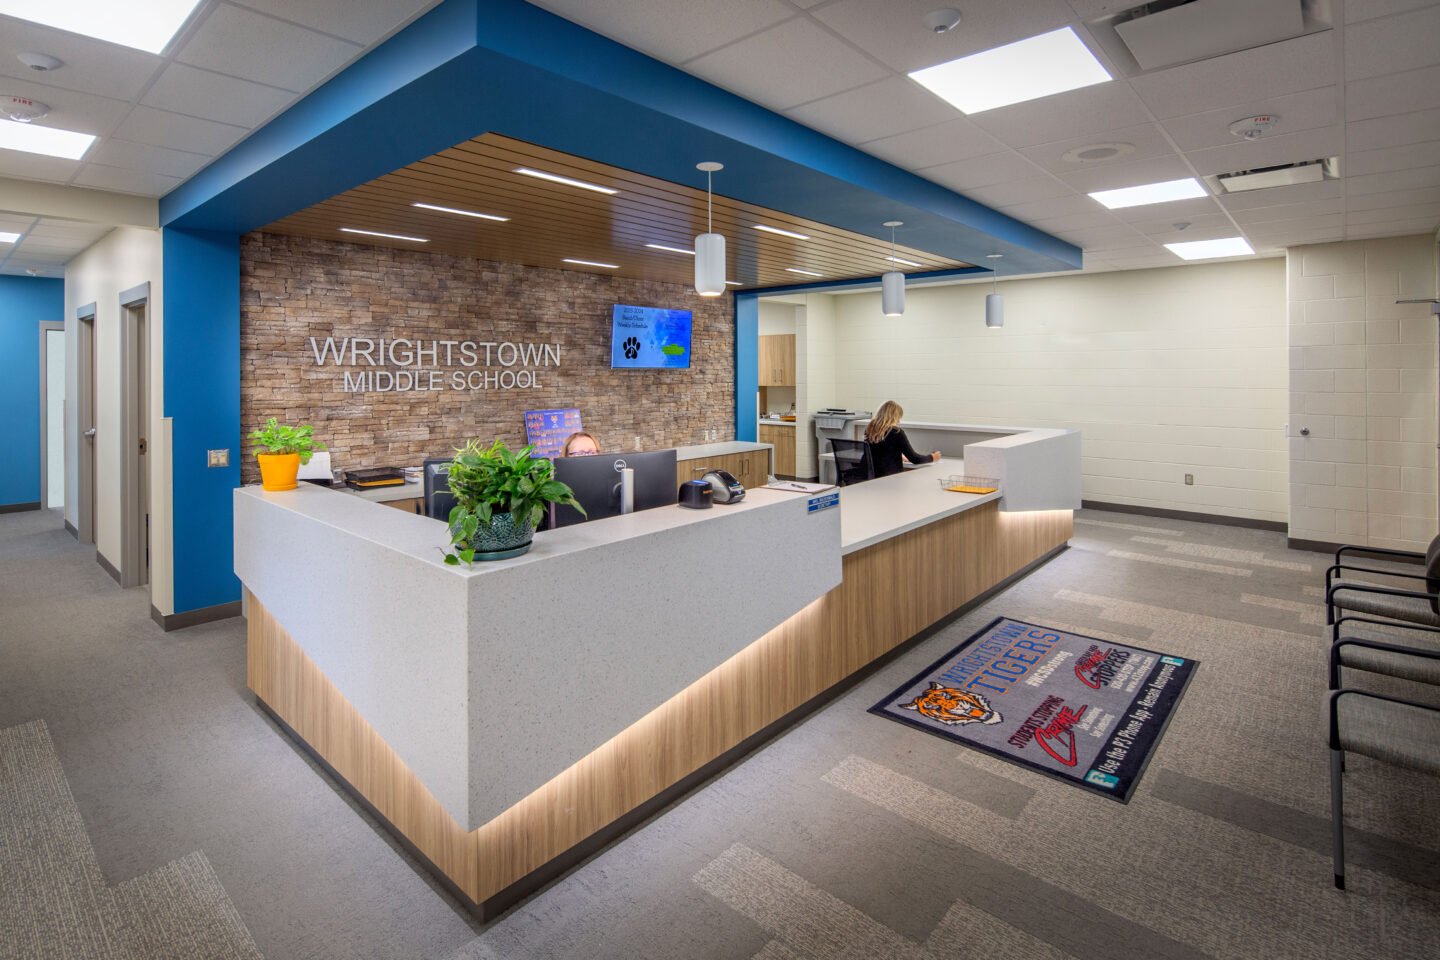 Wrightstown middle school reception area with two receptionist sitting at their station